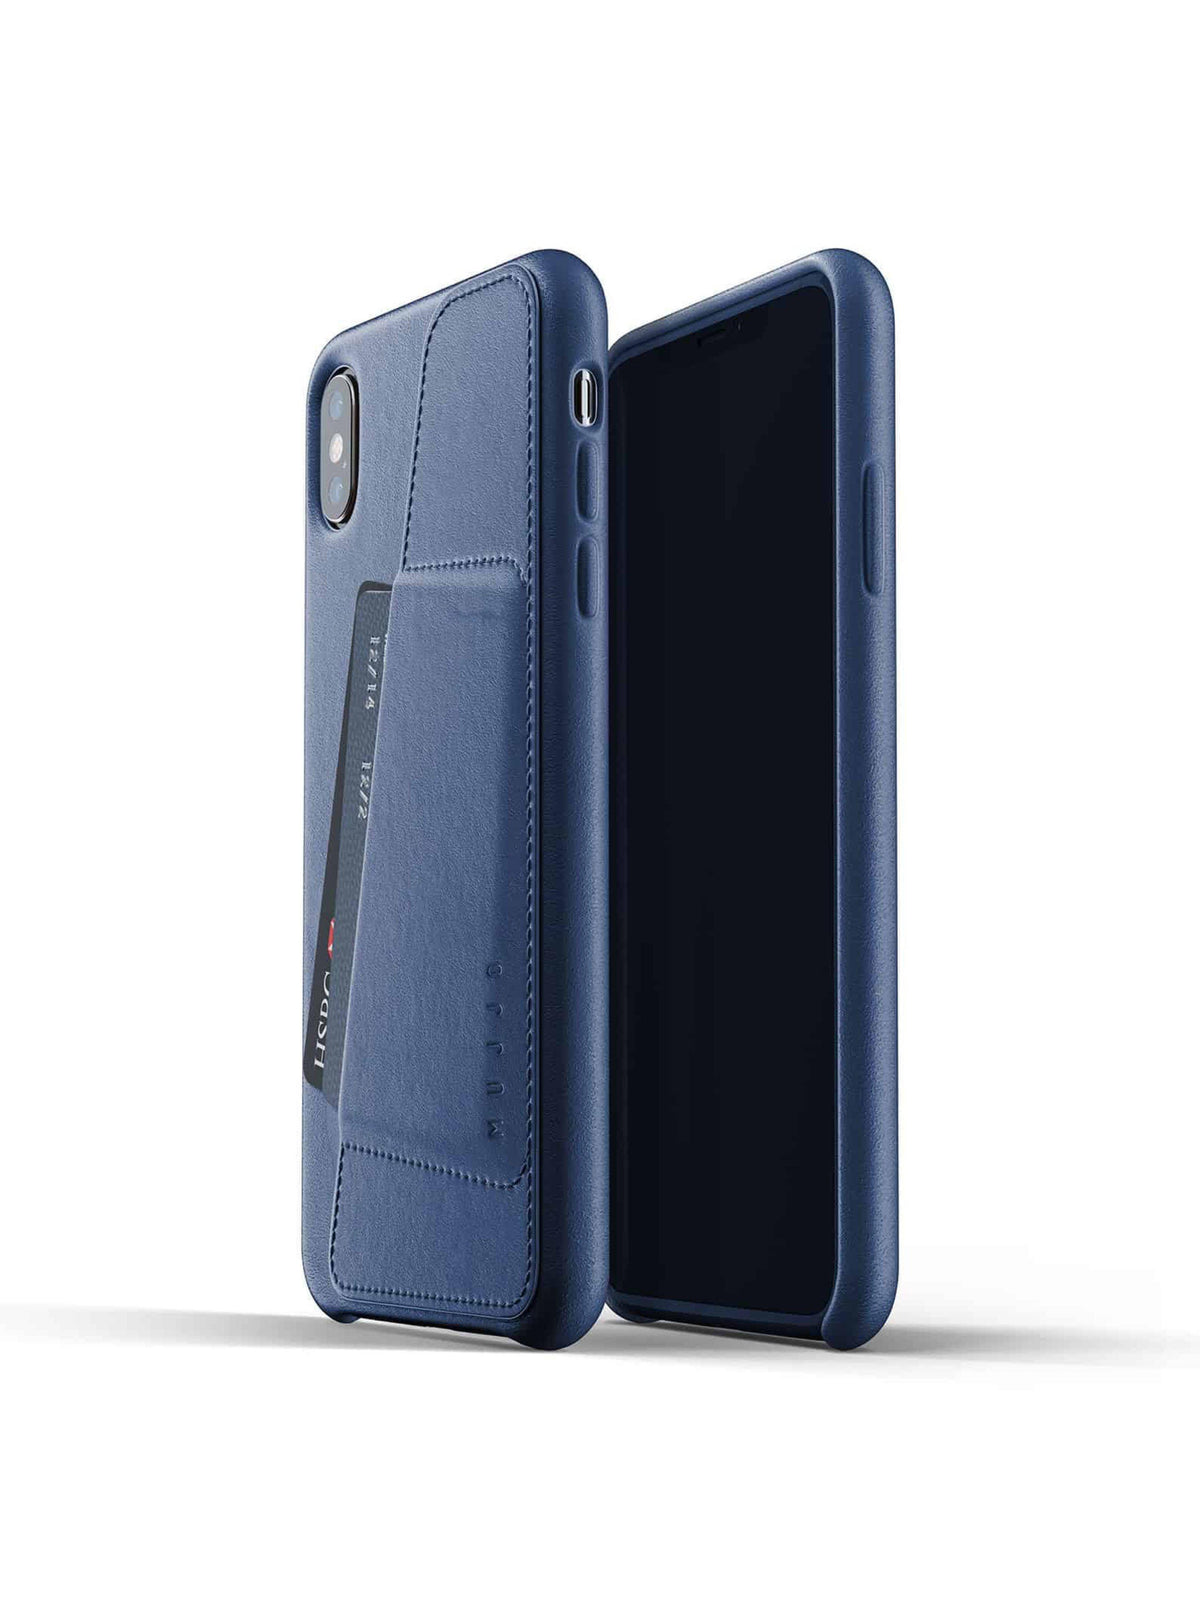 Mujjo Full Leather Wallet Case for iPhone XS Max Monaco Blue